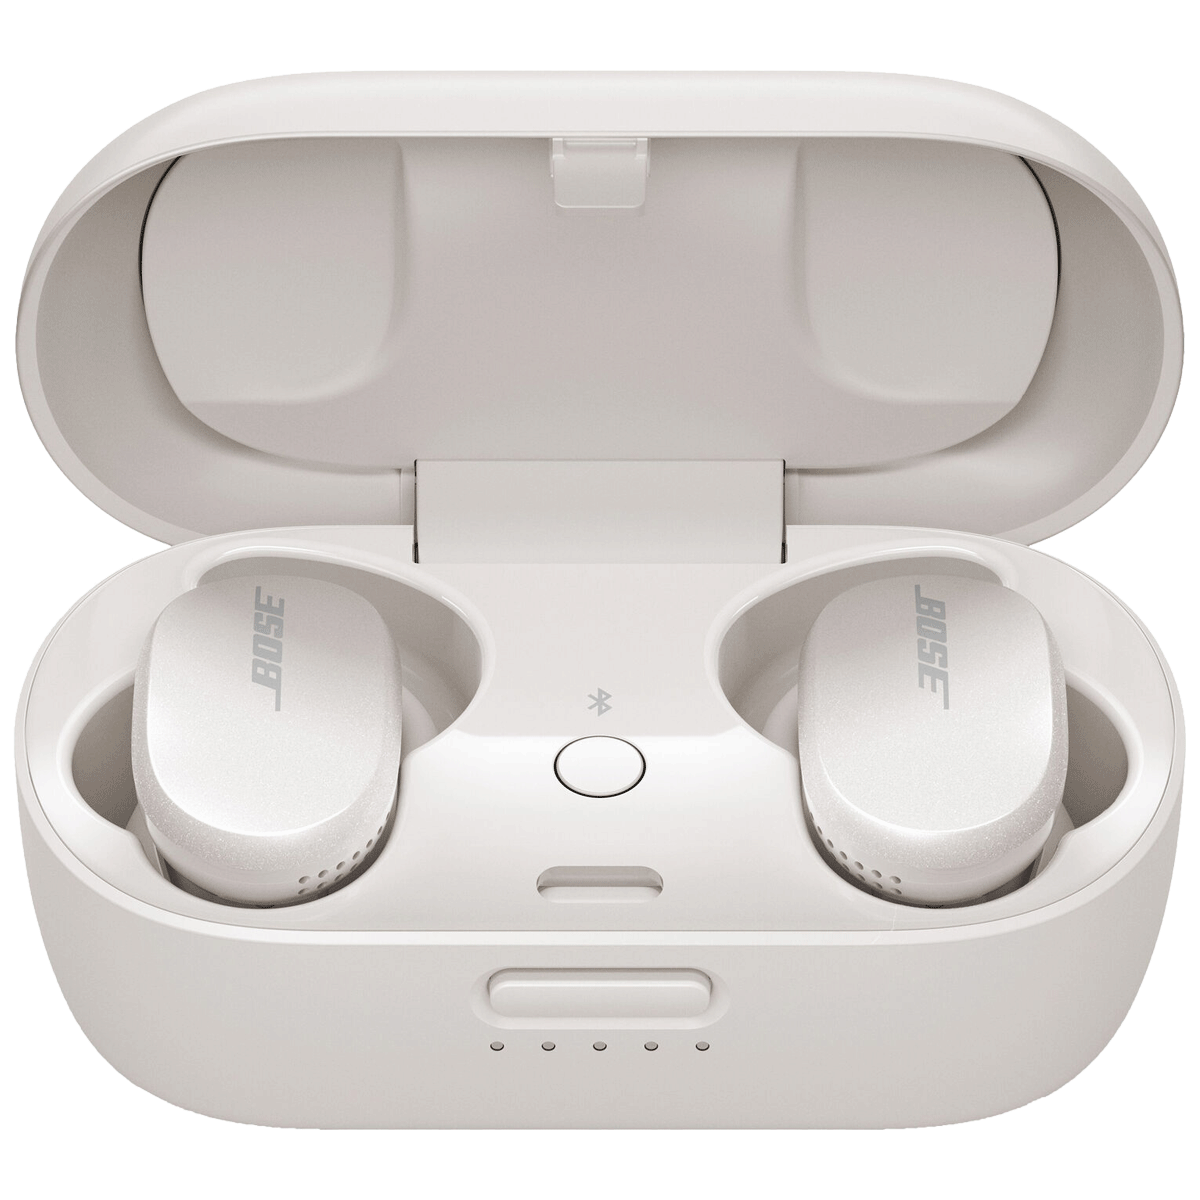 Bose QuietComfort In-Ear 831262-0020 Truly Wireless Earbuds with Mic (Bluetooth 5.1, Sweat and Weather Resistant, Soapstone)_1